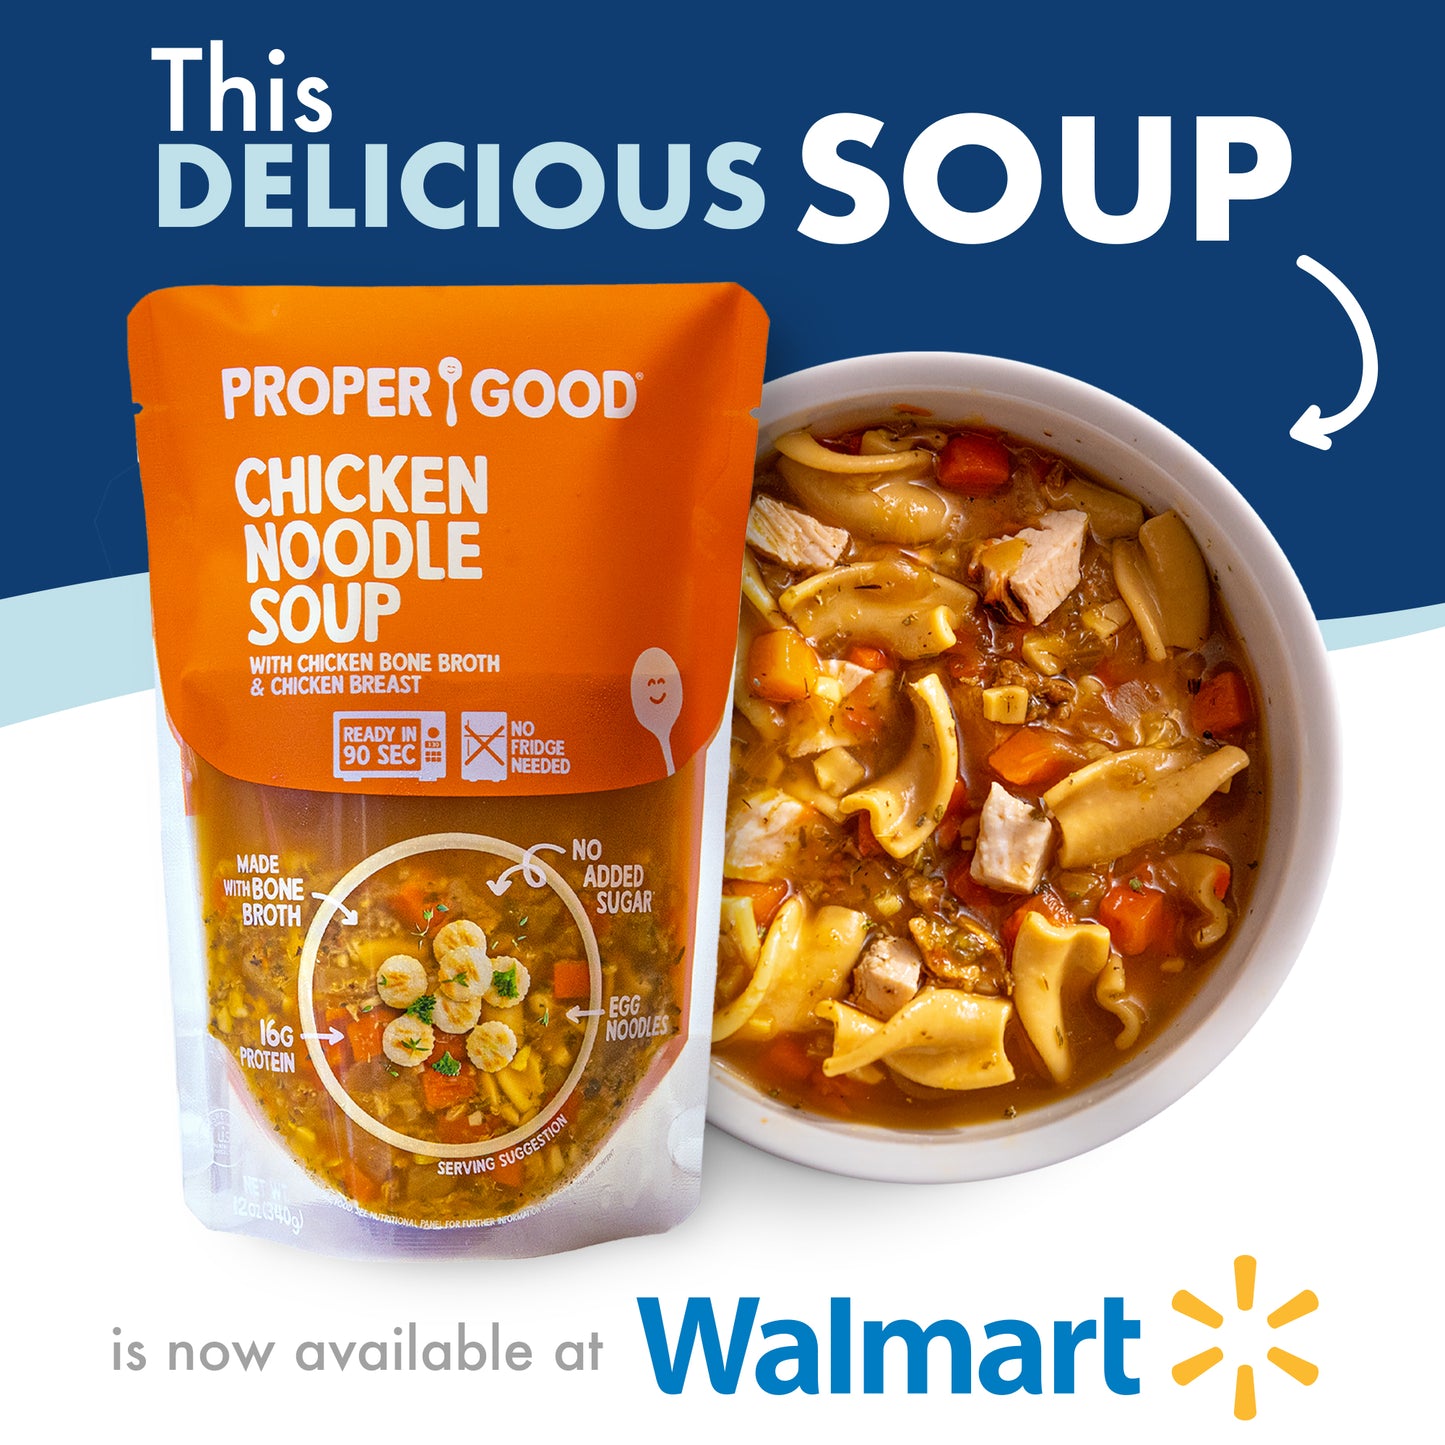 Chicken Noodle Soup available in Walmart - Eat Proper Good